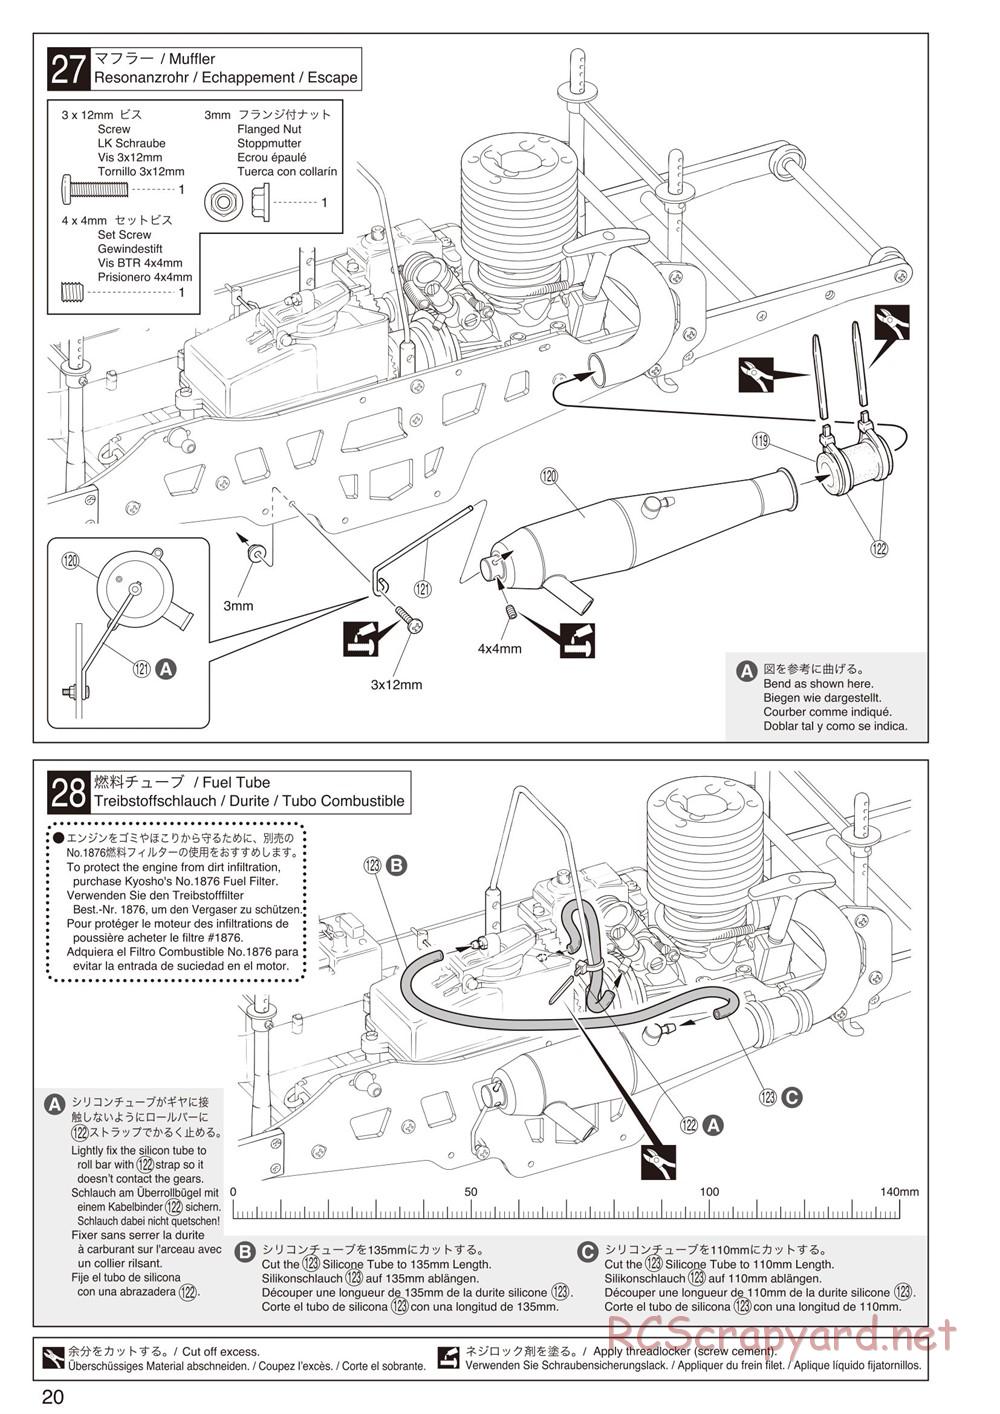 Kyosho - Mad Force Cruiser - Manual - Page 20